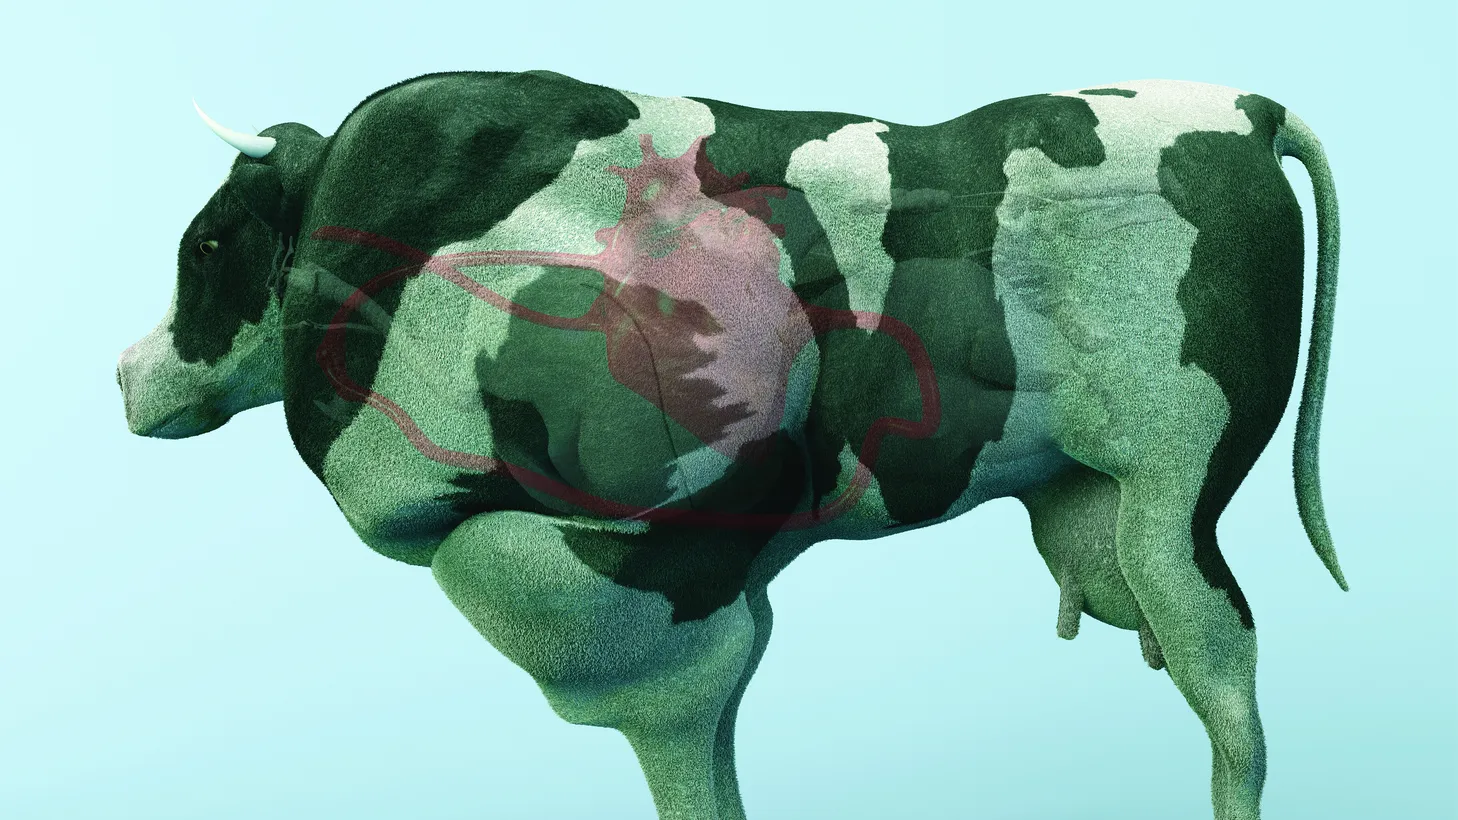 In his project “The Cow of Tomorrow,” artist Paul Gong creates a future scenario where already heavily redesigned farm animals can be further modified for energy production.